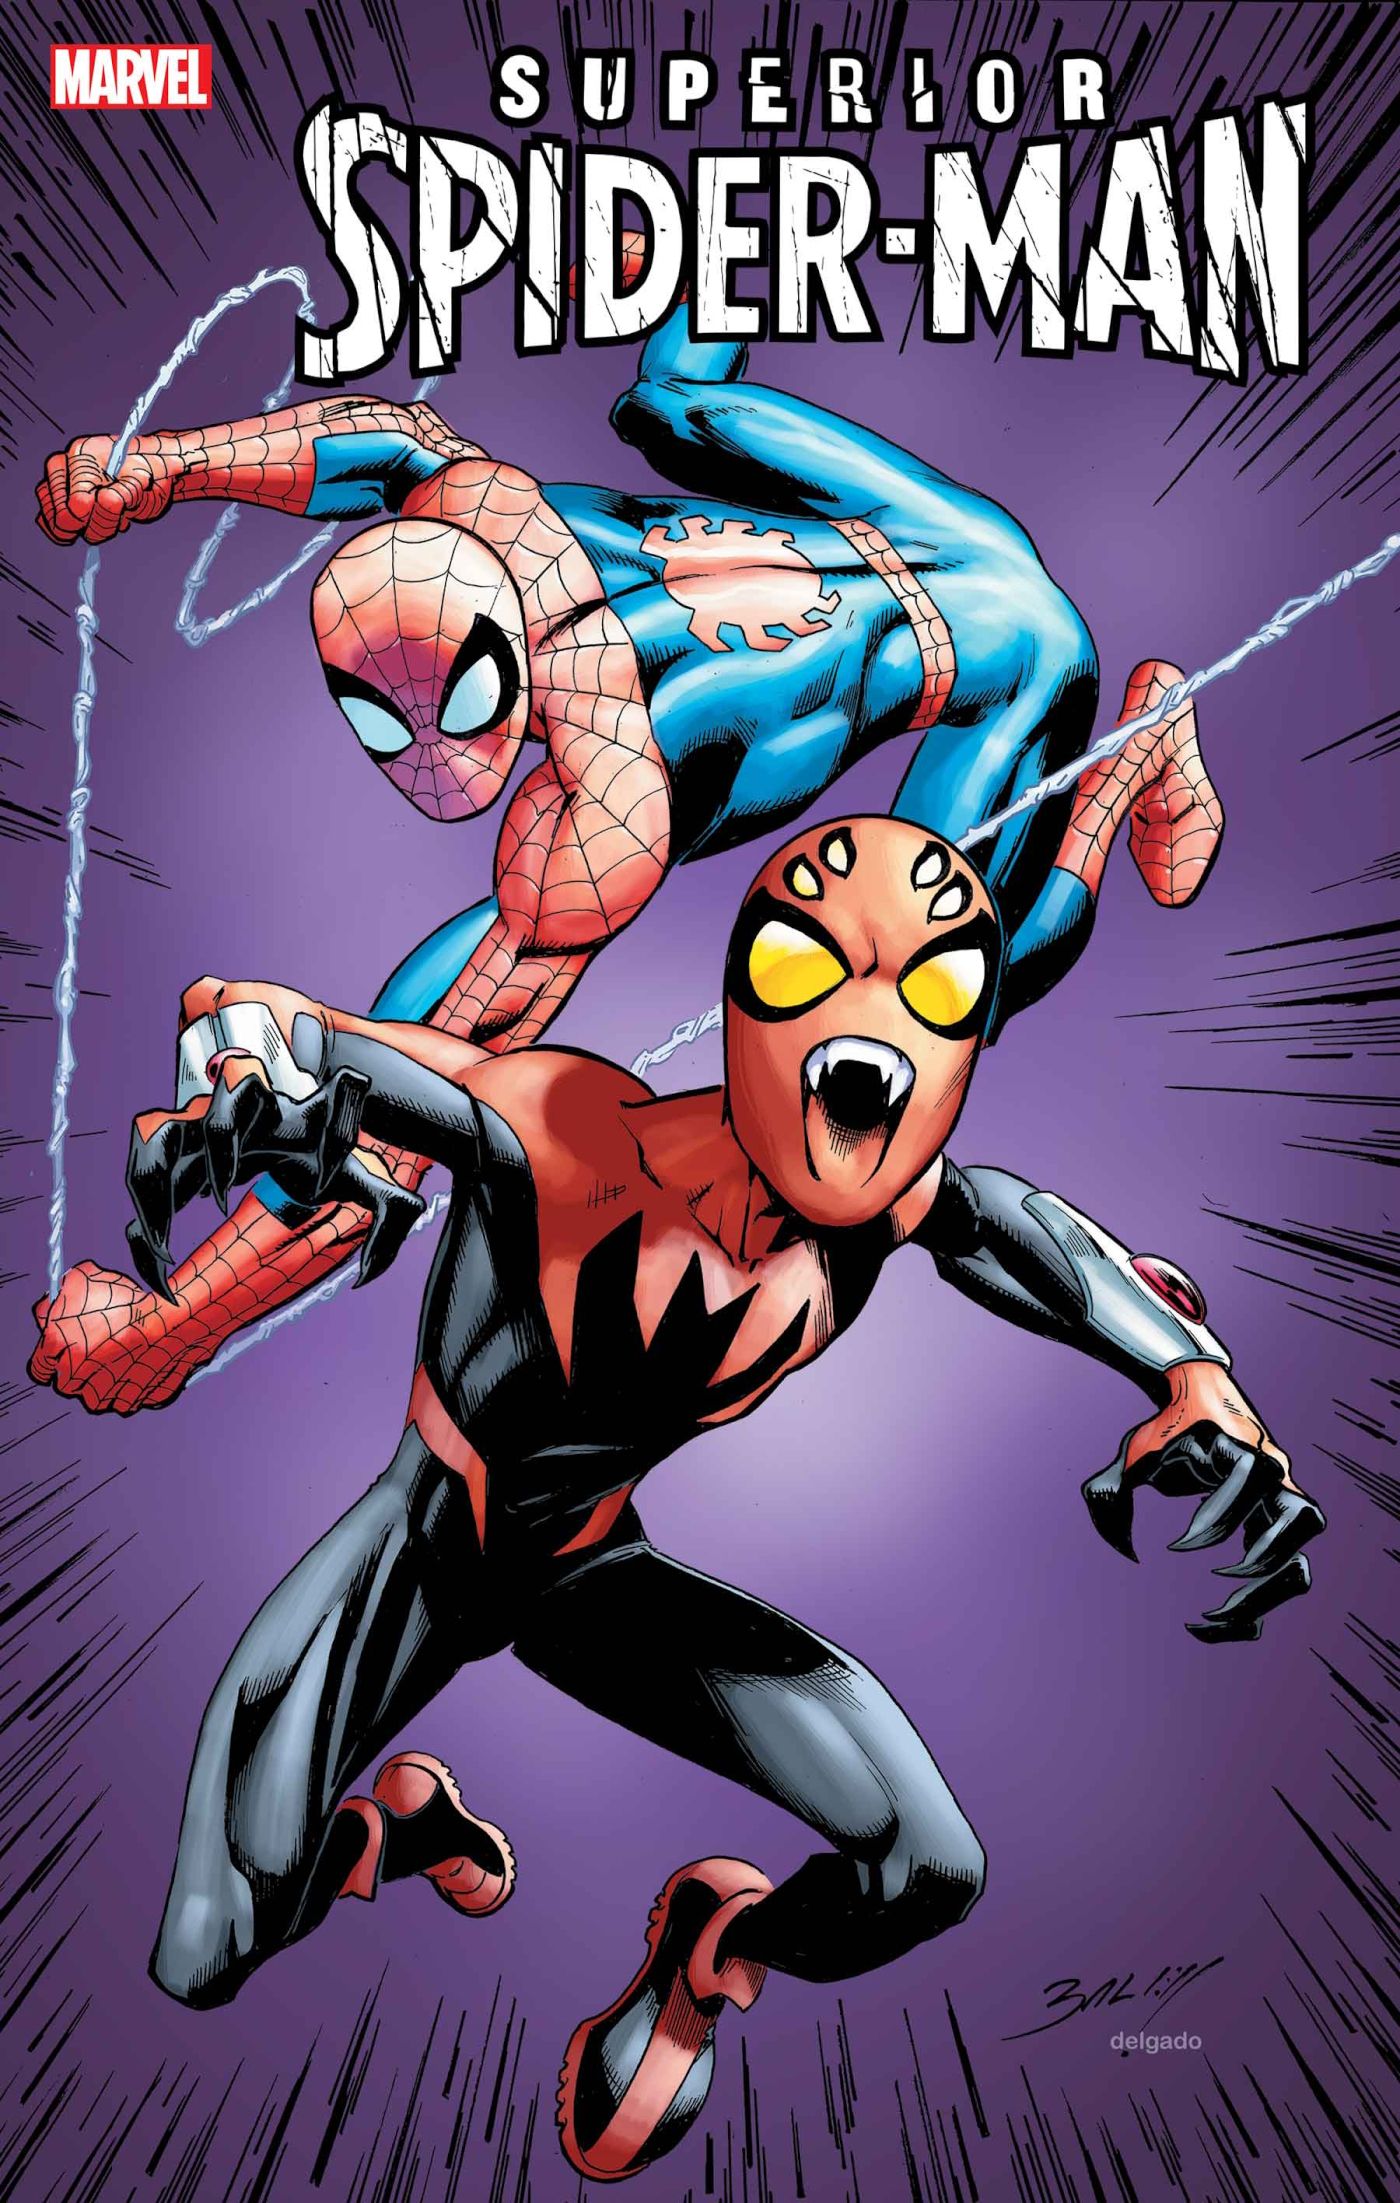 Doctor Octopus Is the SUPERIOR SPIDER-BOY, As He Steals the Body of Spider-Man’s Sidekick